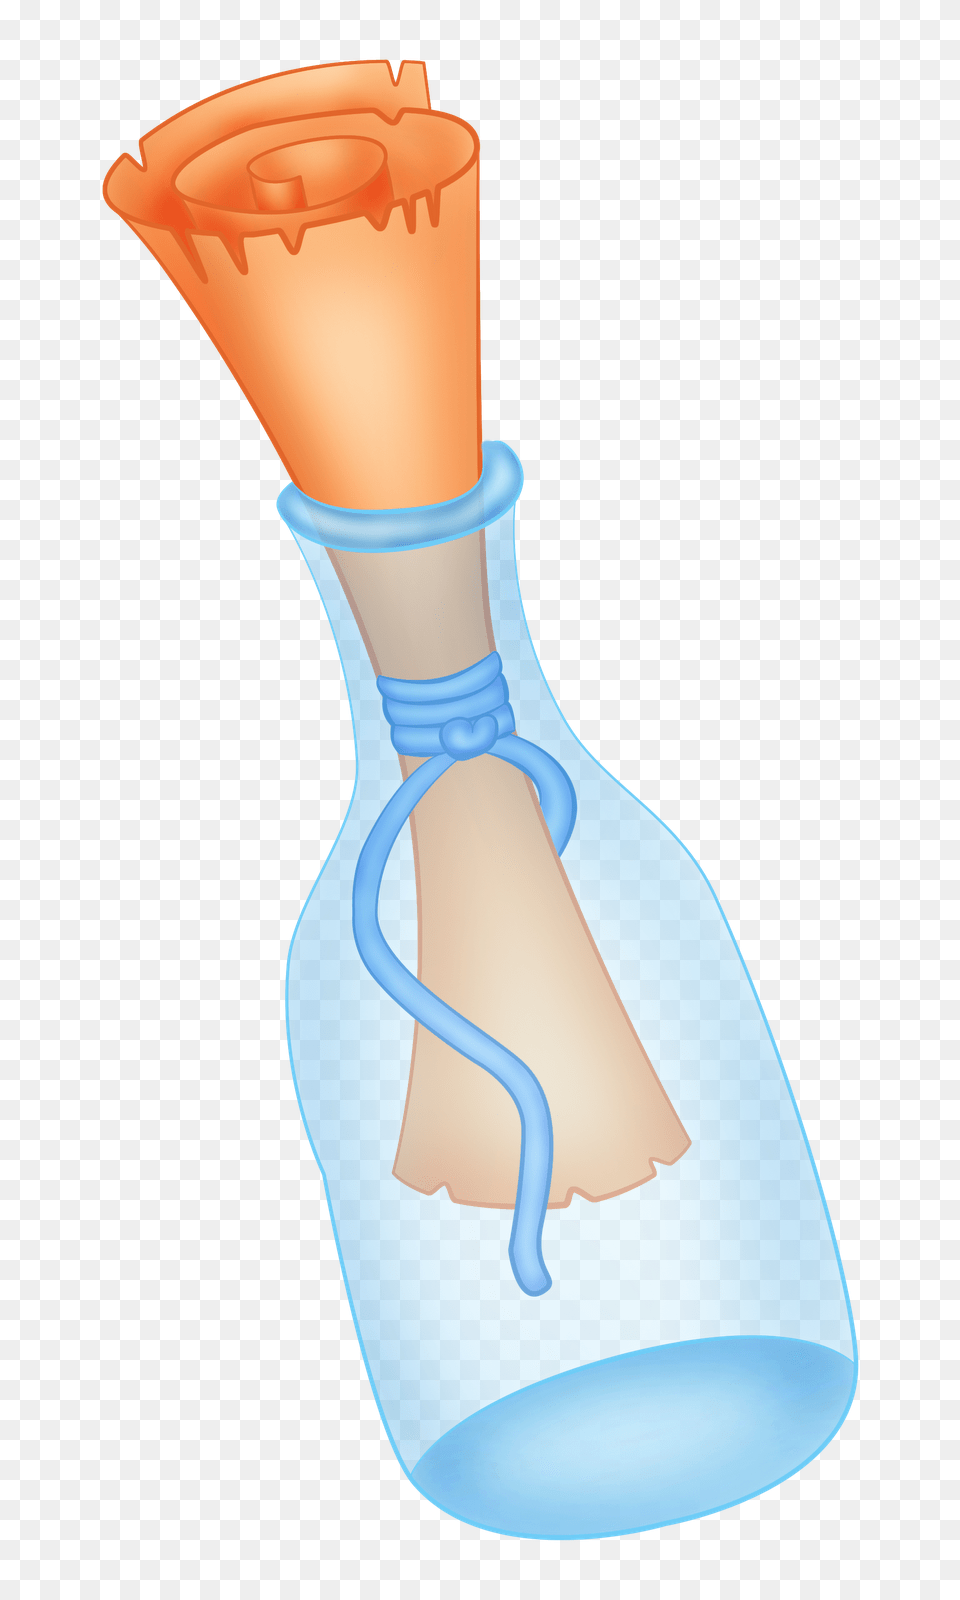 Feet Clipart Ankle Feet Ankle Transparent For Jar, Smoke Pipe, Bottle Free Png Download